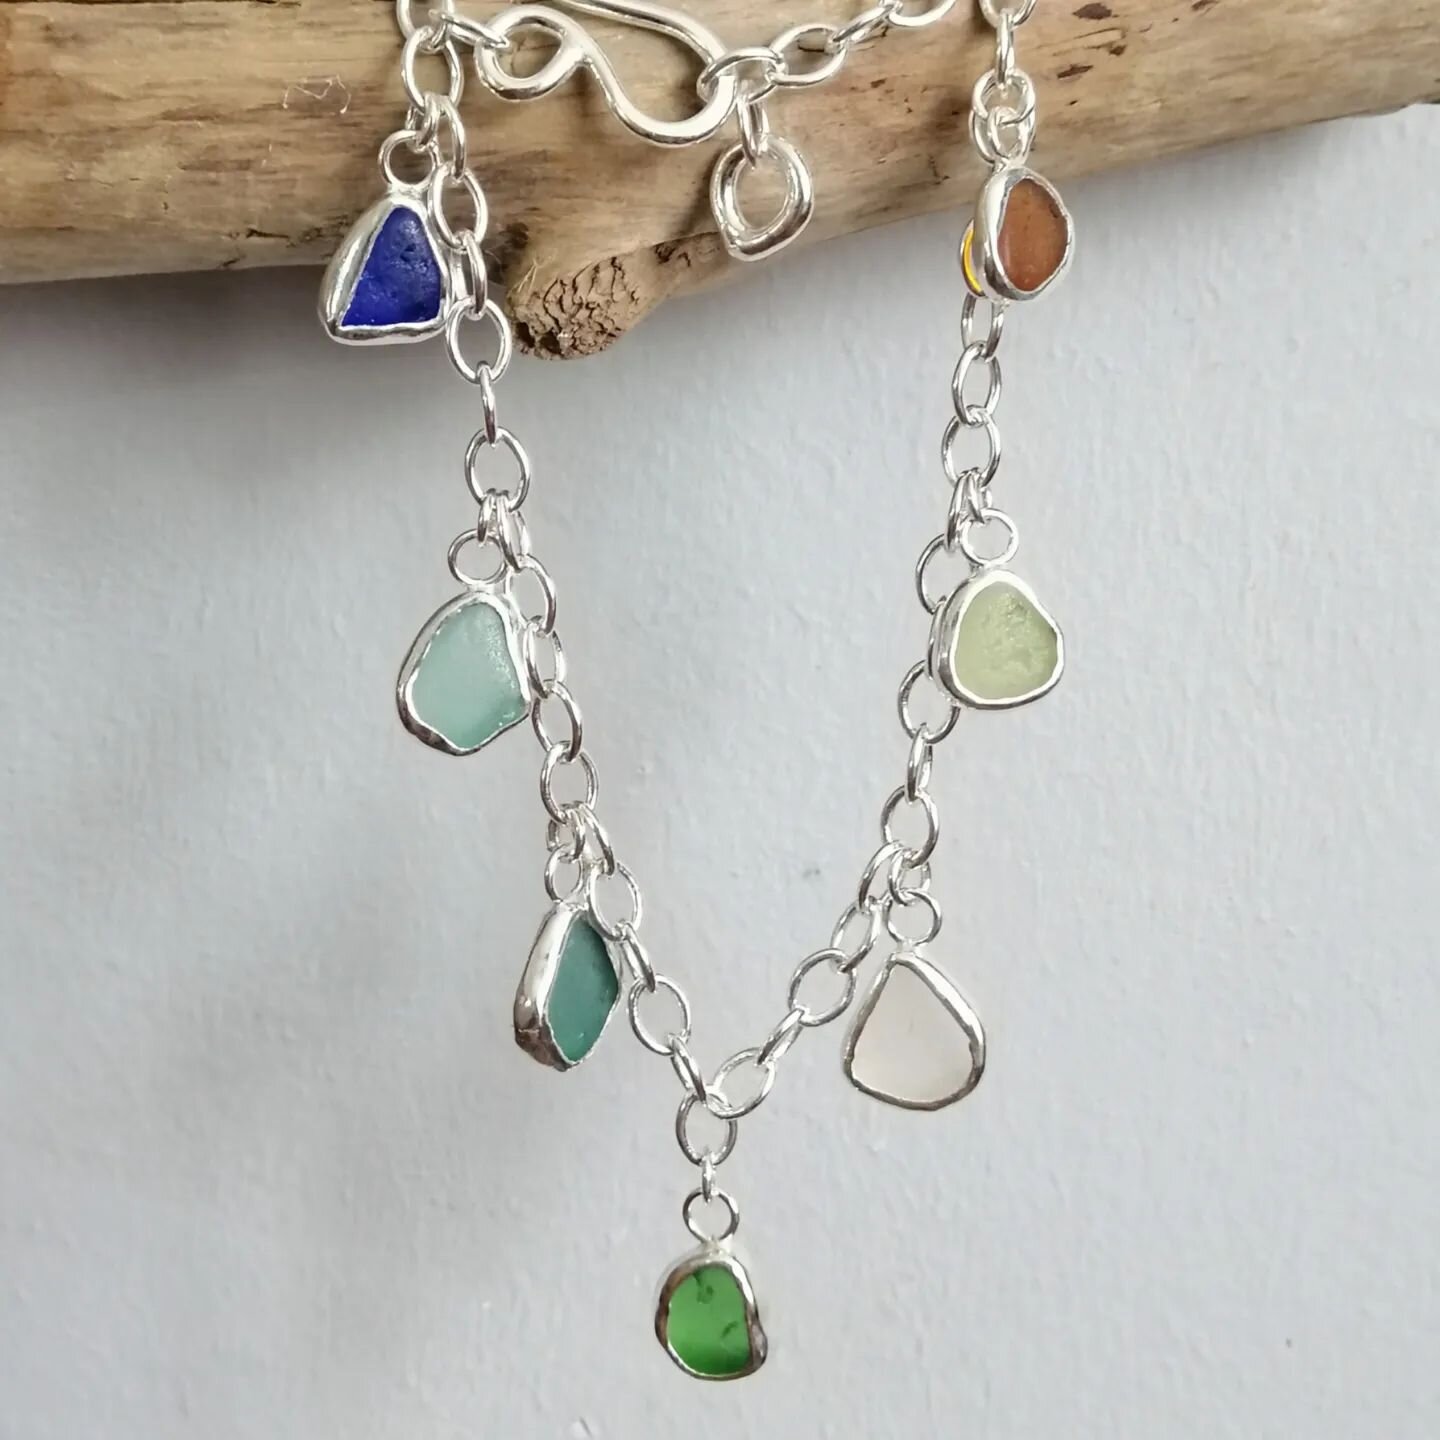 I've wanted to make a rainbow Seaglass Bracelet for ages but finding the right pieces and then the time to do all the fiddly work has been hard! But making this bracelet gave me so much joy 😁🌊 Currently this is the only one but I absolutely want to